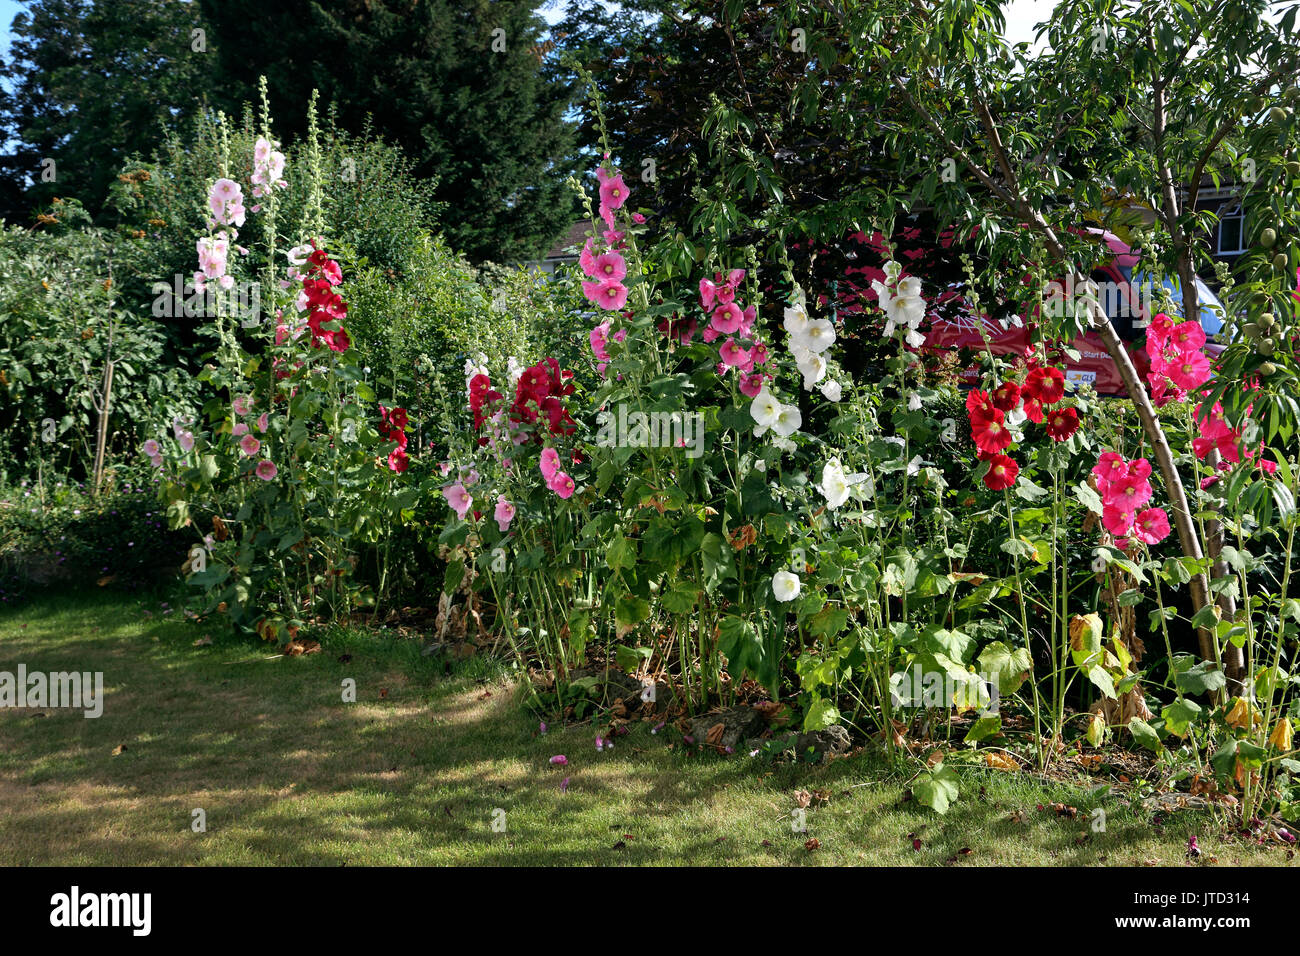 Red, Pink And White Hollyhocks in Garden Surrey England Stock Photo